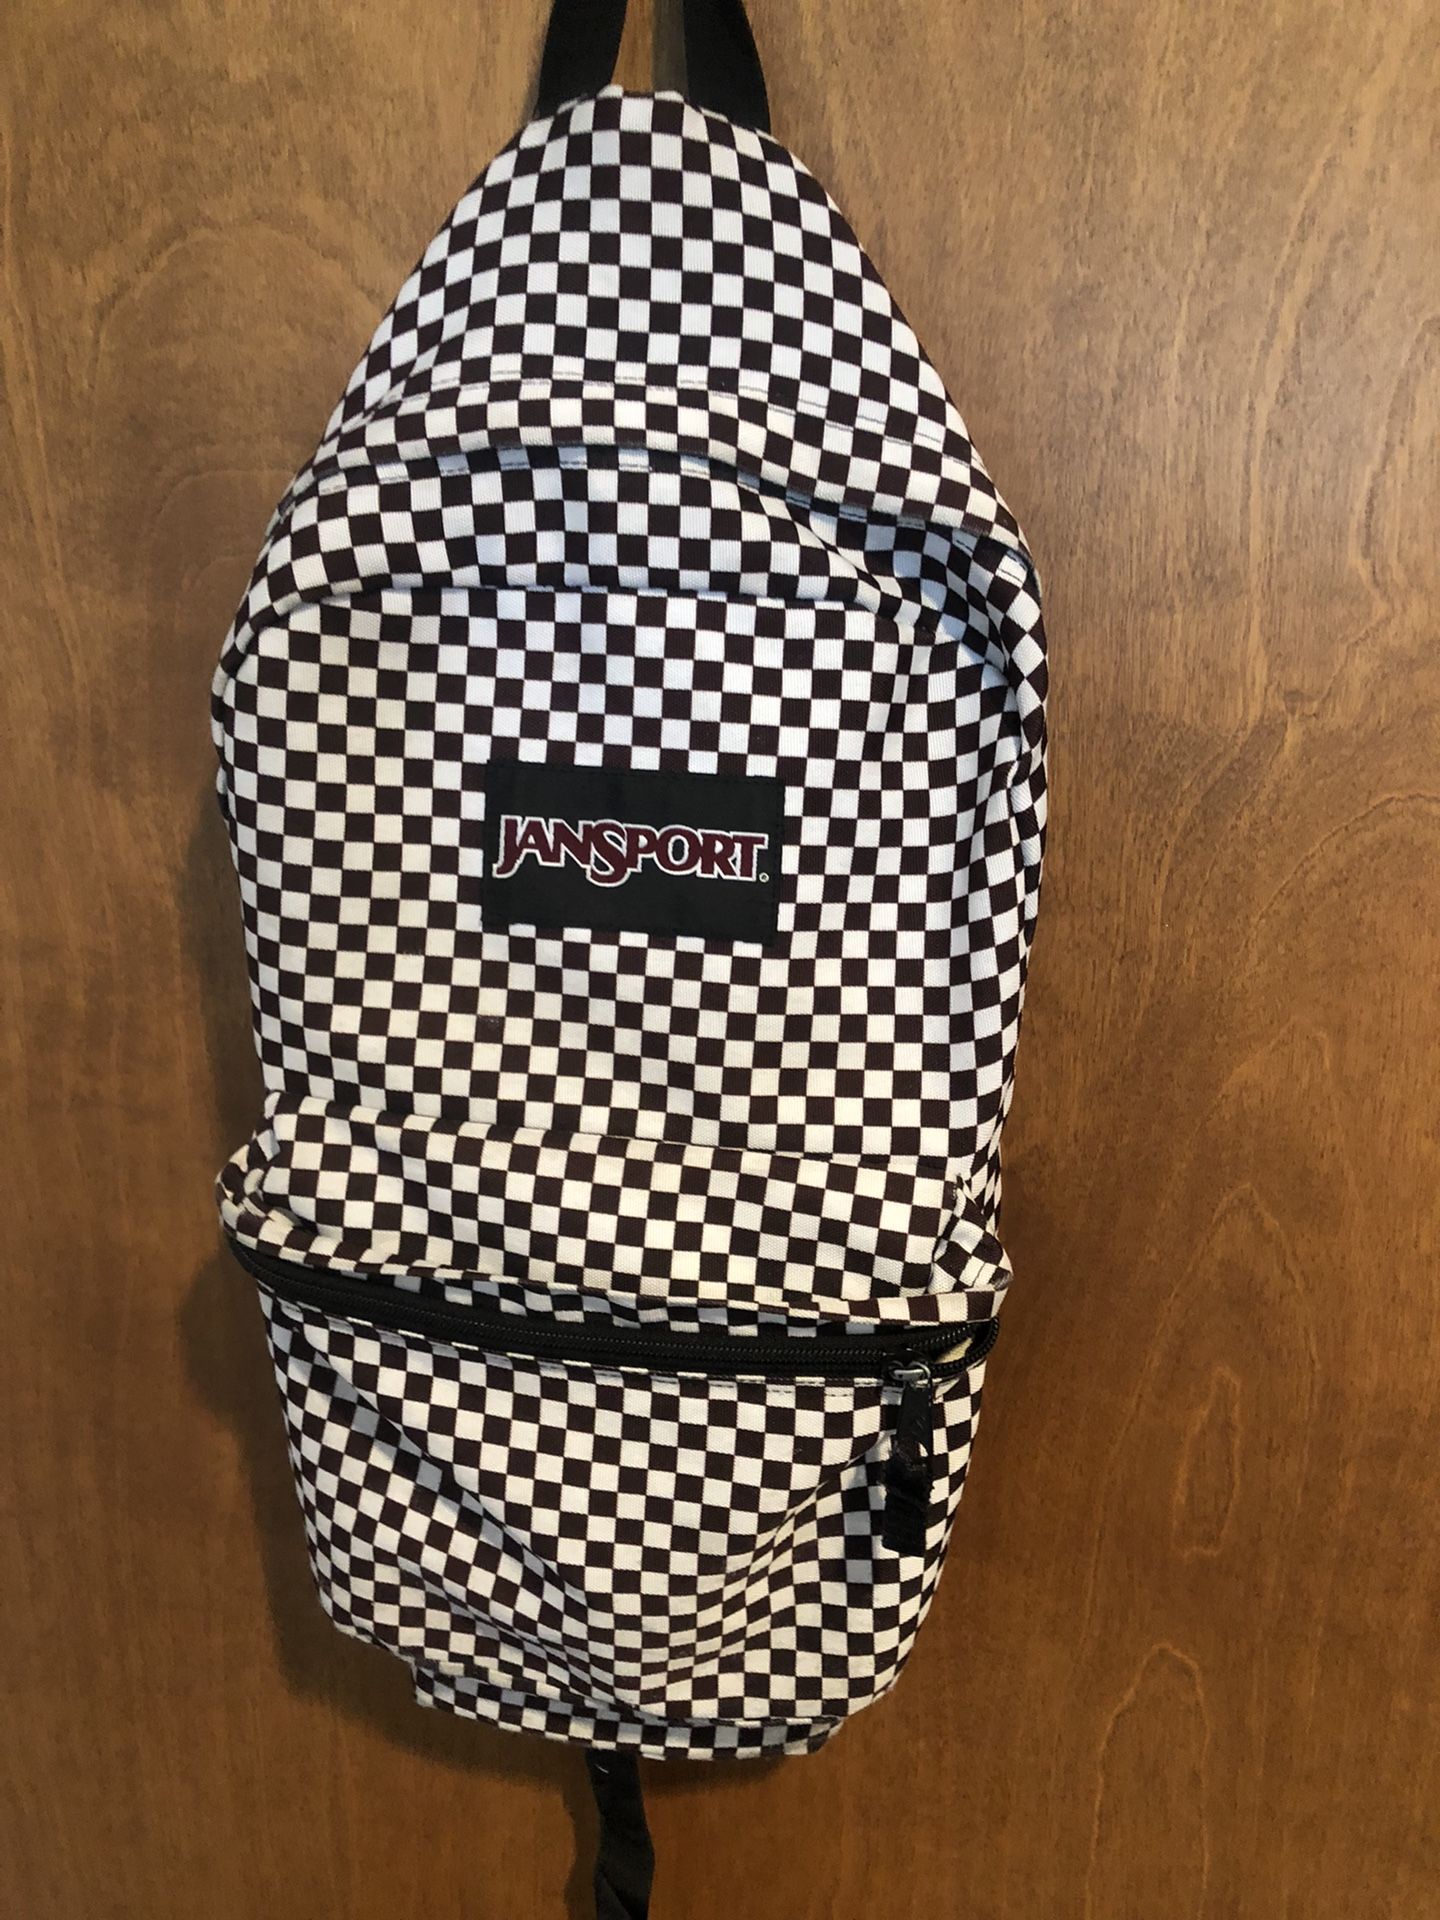 Jansport Checkered Backpack Good Condition Only $20!!!!